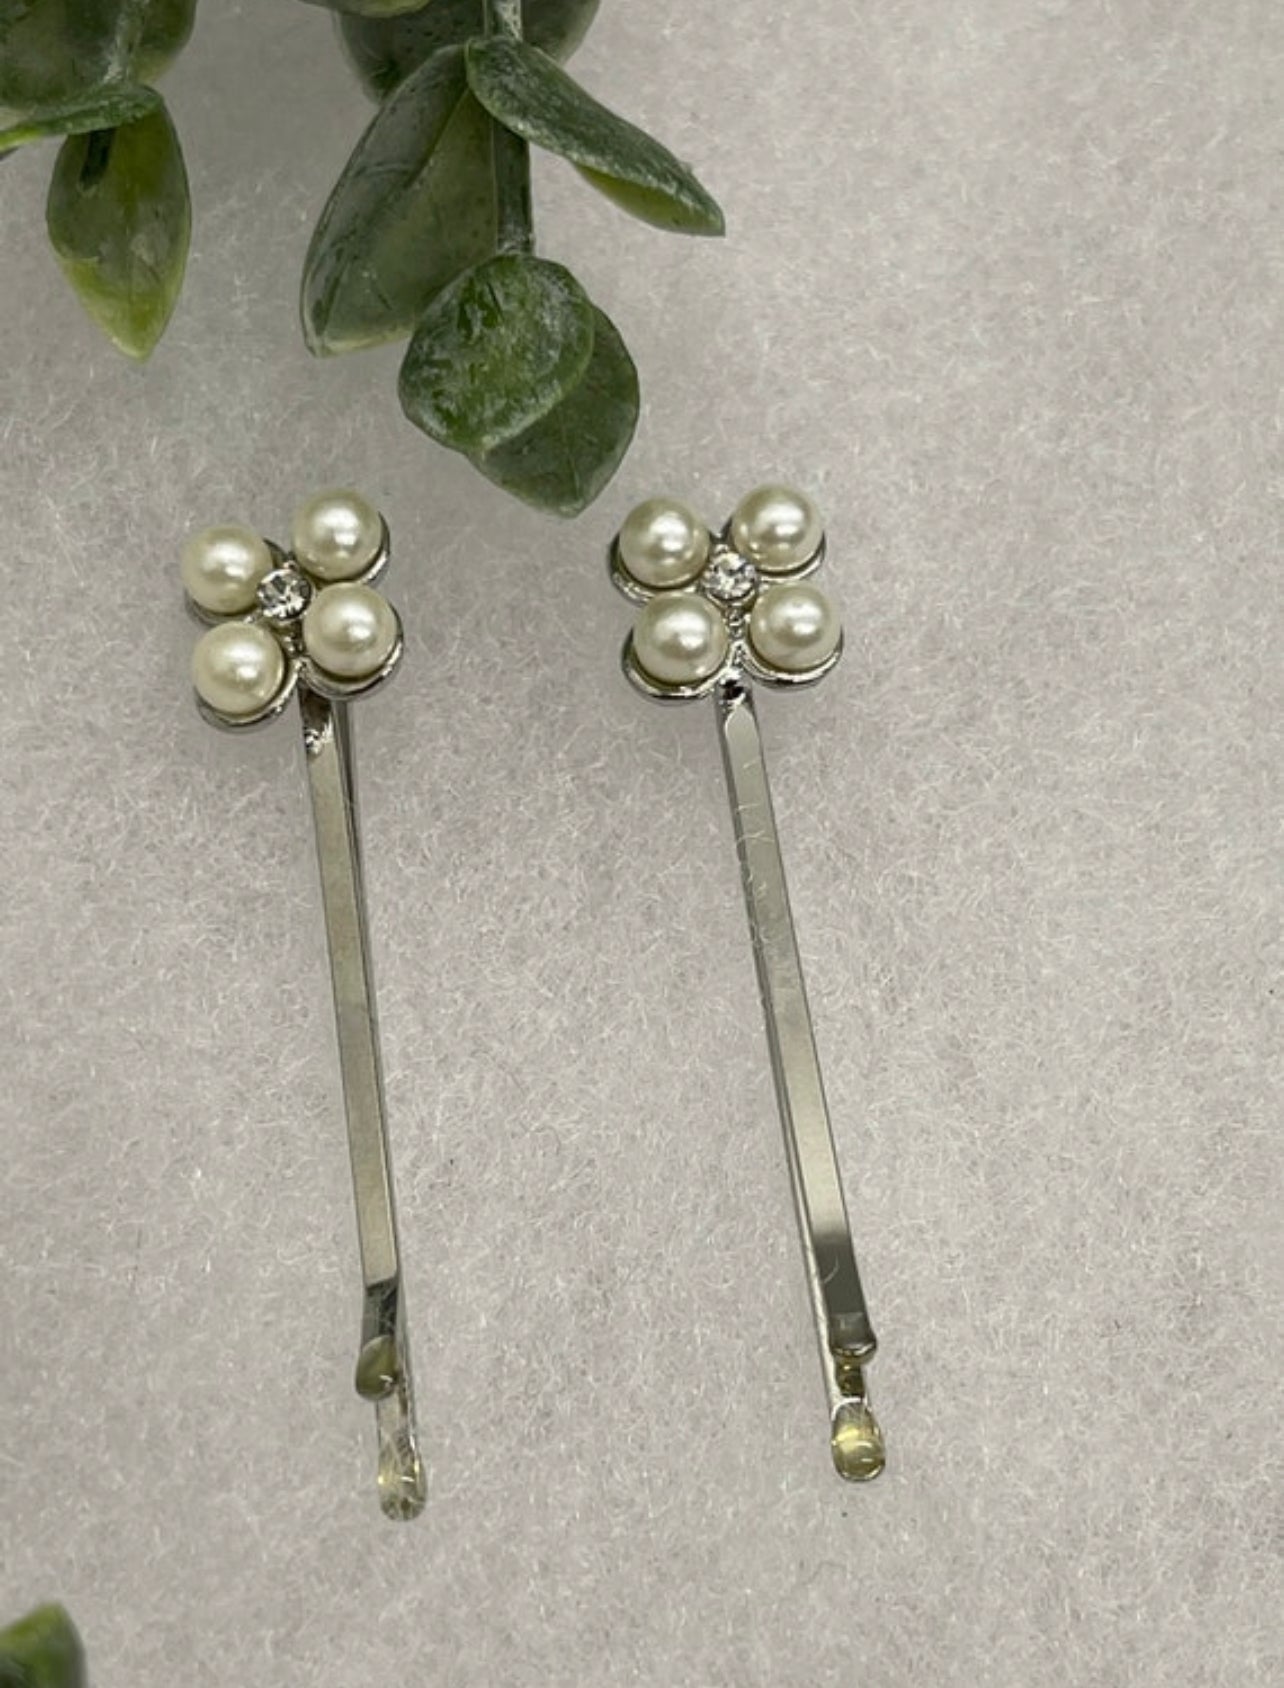 2.pc set Pearl silver vintage antique style hair pin approximately 2.5” long Handmade hair accessory bridal wedding